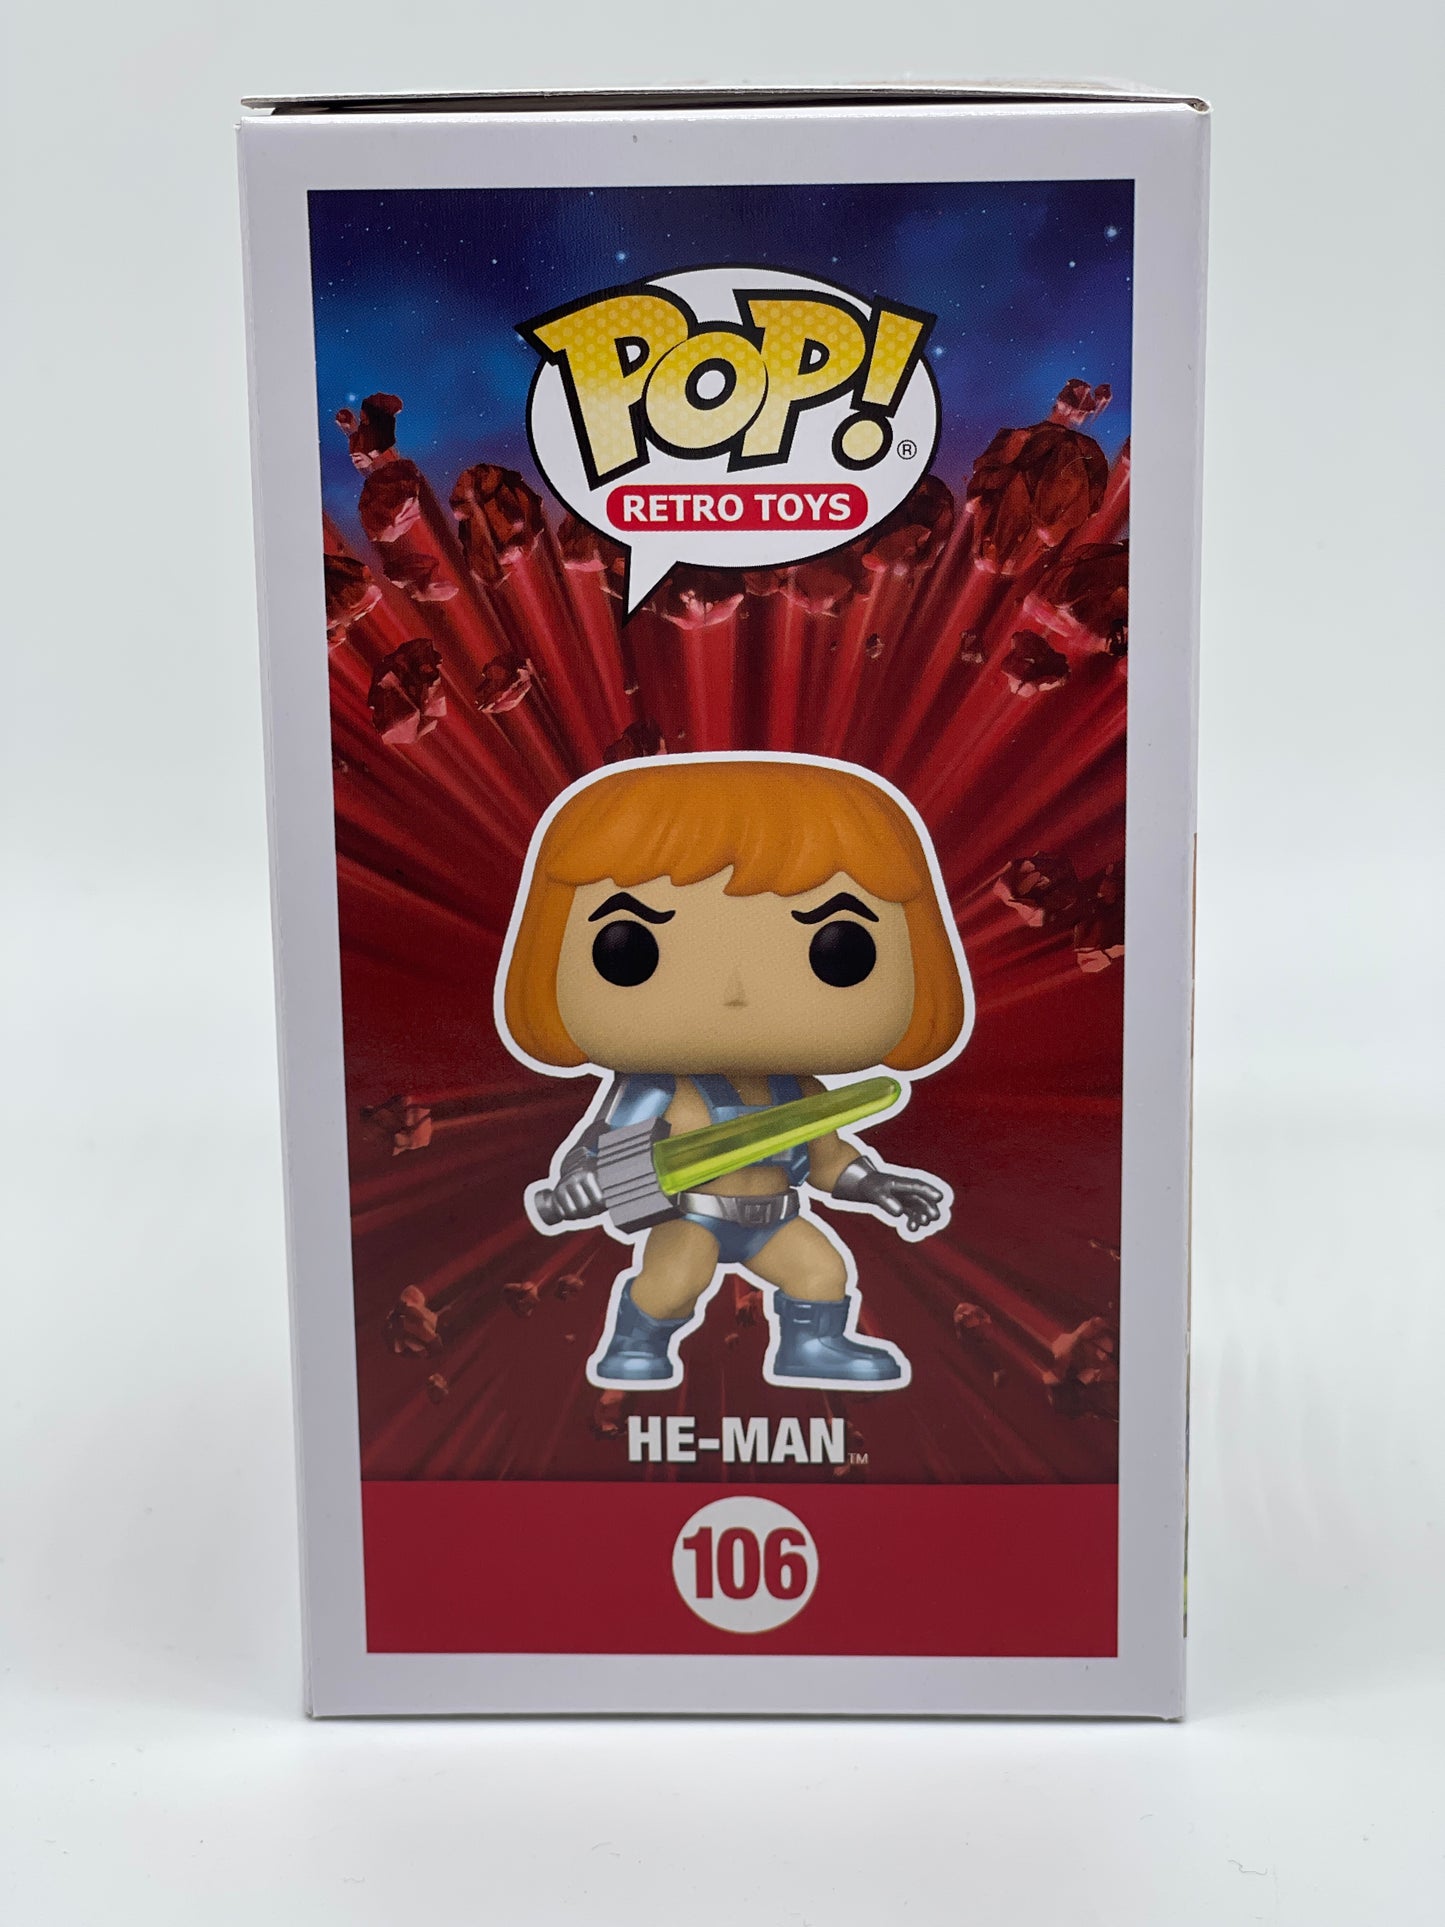 Funko Pop! Retro Toys "He-Man" #106 SDCC Exclusive Masters of the Universe 2022